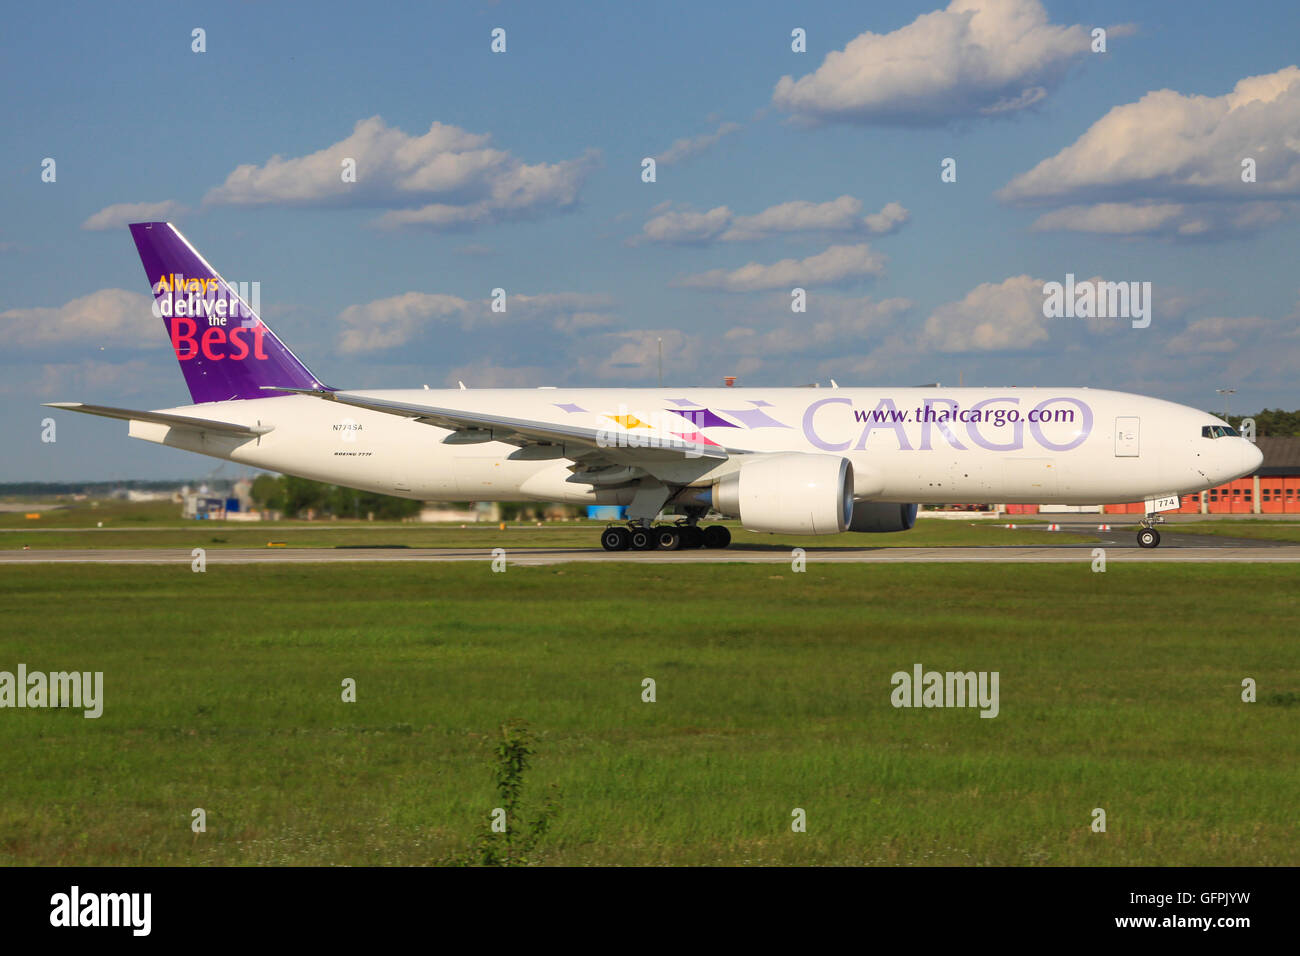 Frankurt/Germany March 12, 2014: Boeing 777 from Thai Cargo at Frankfurt Airport. Stock Photo